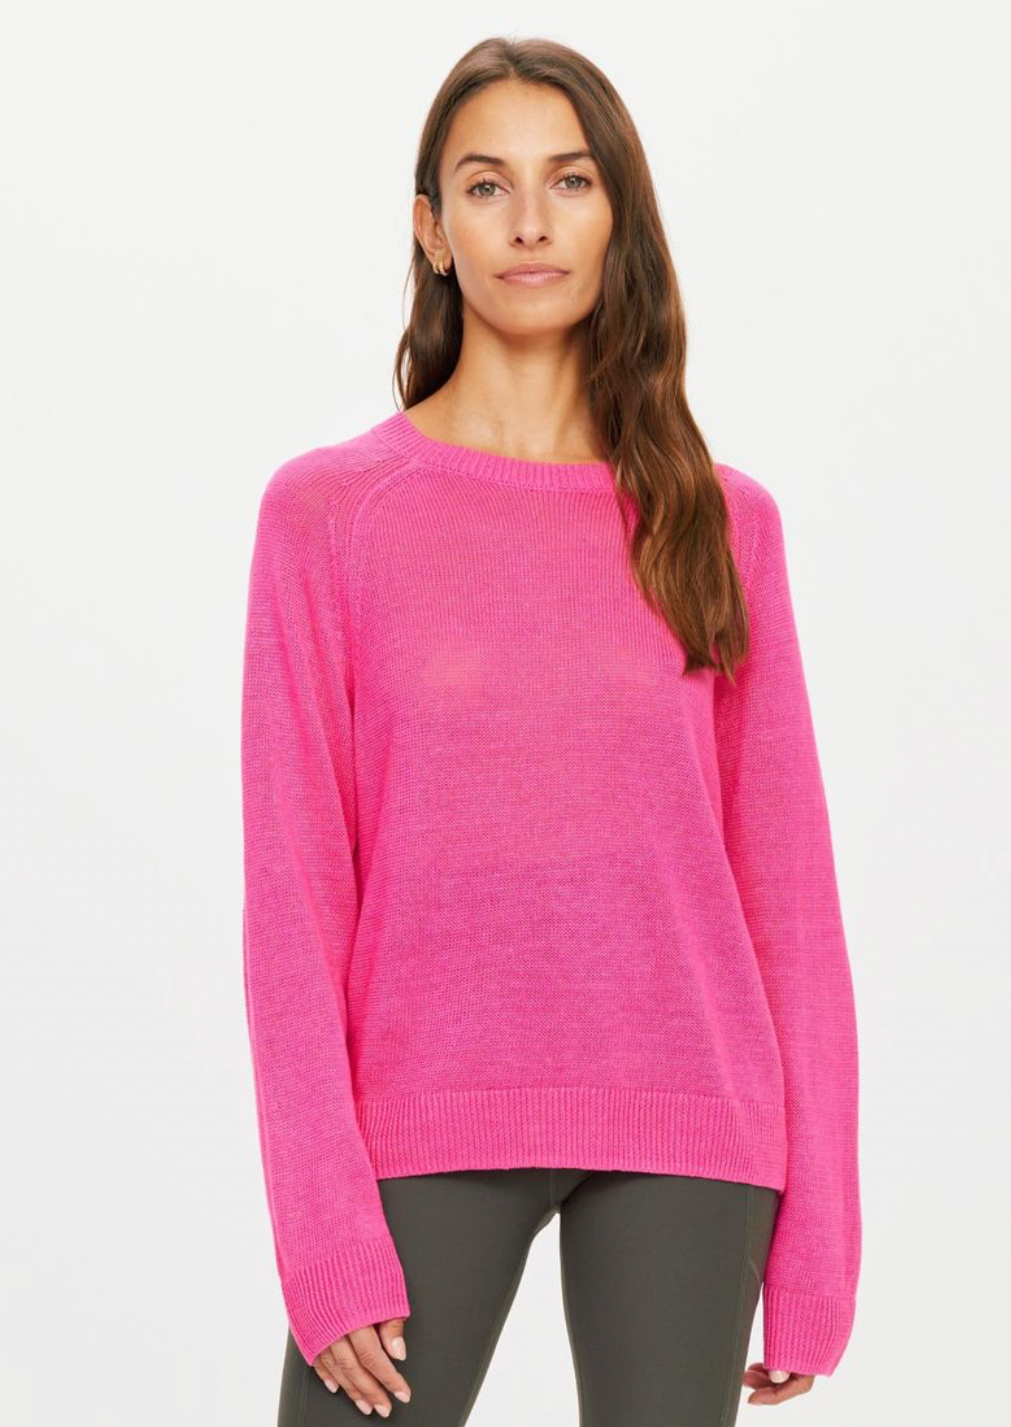 Sirena Knit Sweater - Hot Pink, by The Upside. Spice up this seasons wardrobe with the Sirena Knit. Light-Mid weight, relaxed fit knit sweater in Hot Pink. Crew neck. Raglan sleeve. 100% Organic Cotton composition